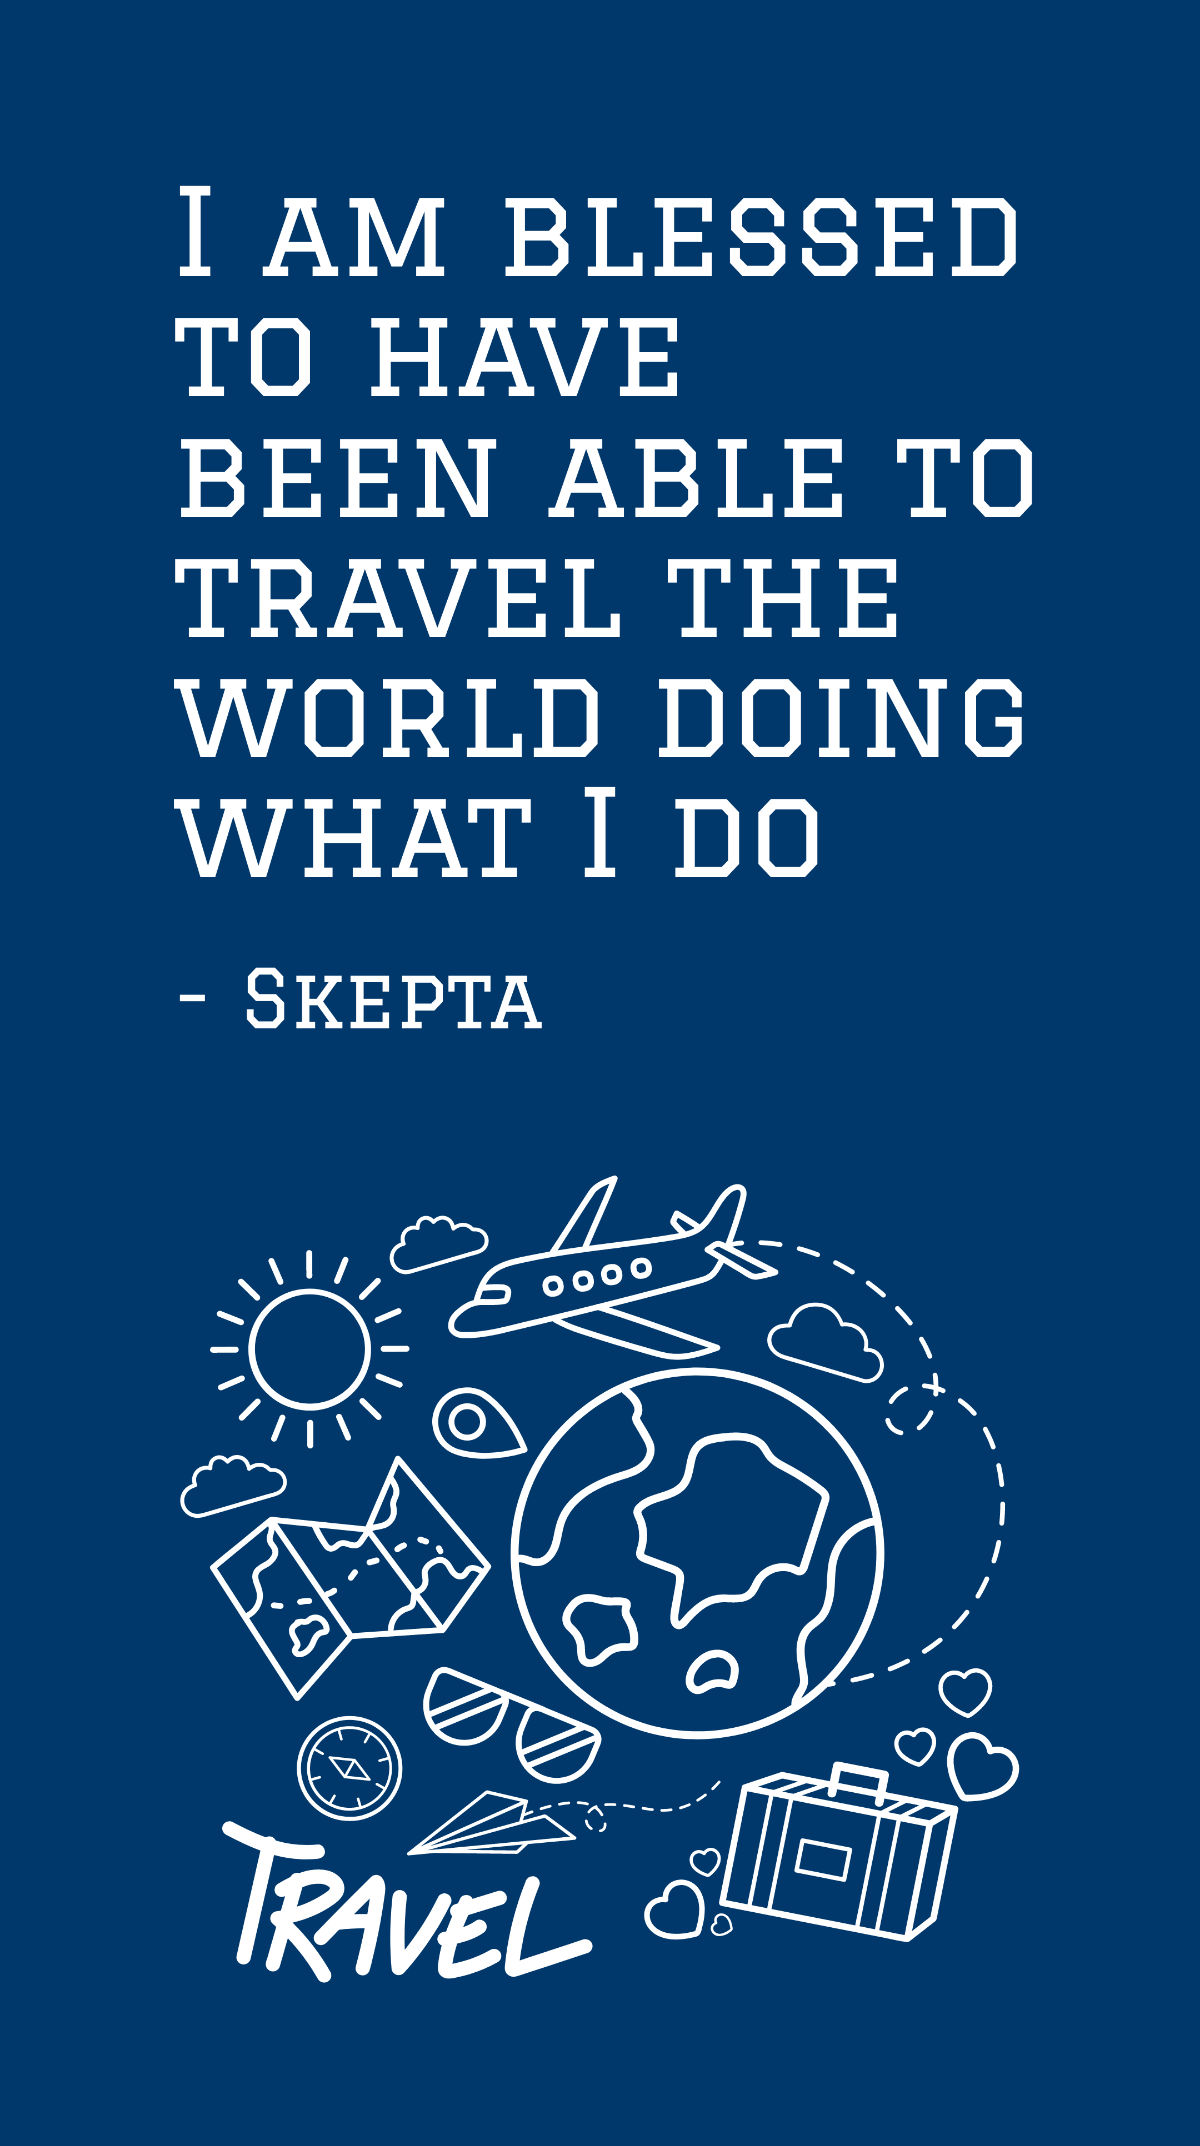 Free Skepta - I am blessed to have been able to travel the world doing what I do Template